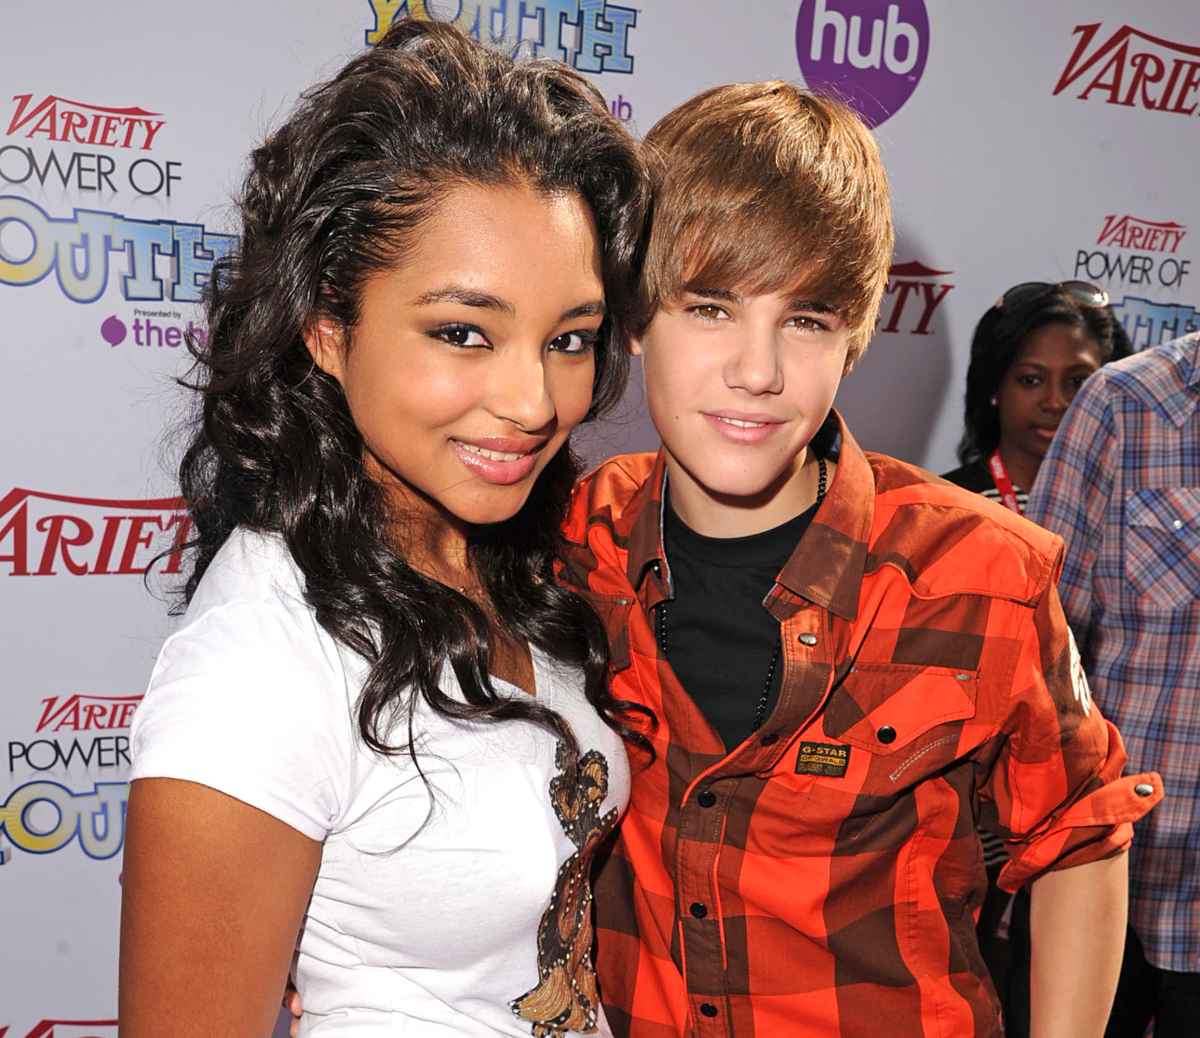 Justin dating Abidjan is who bieber today in Justin Bieber